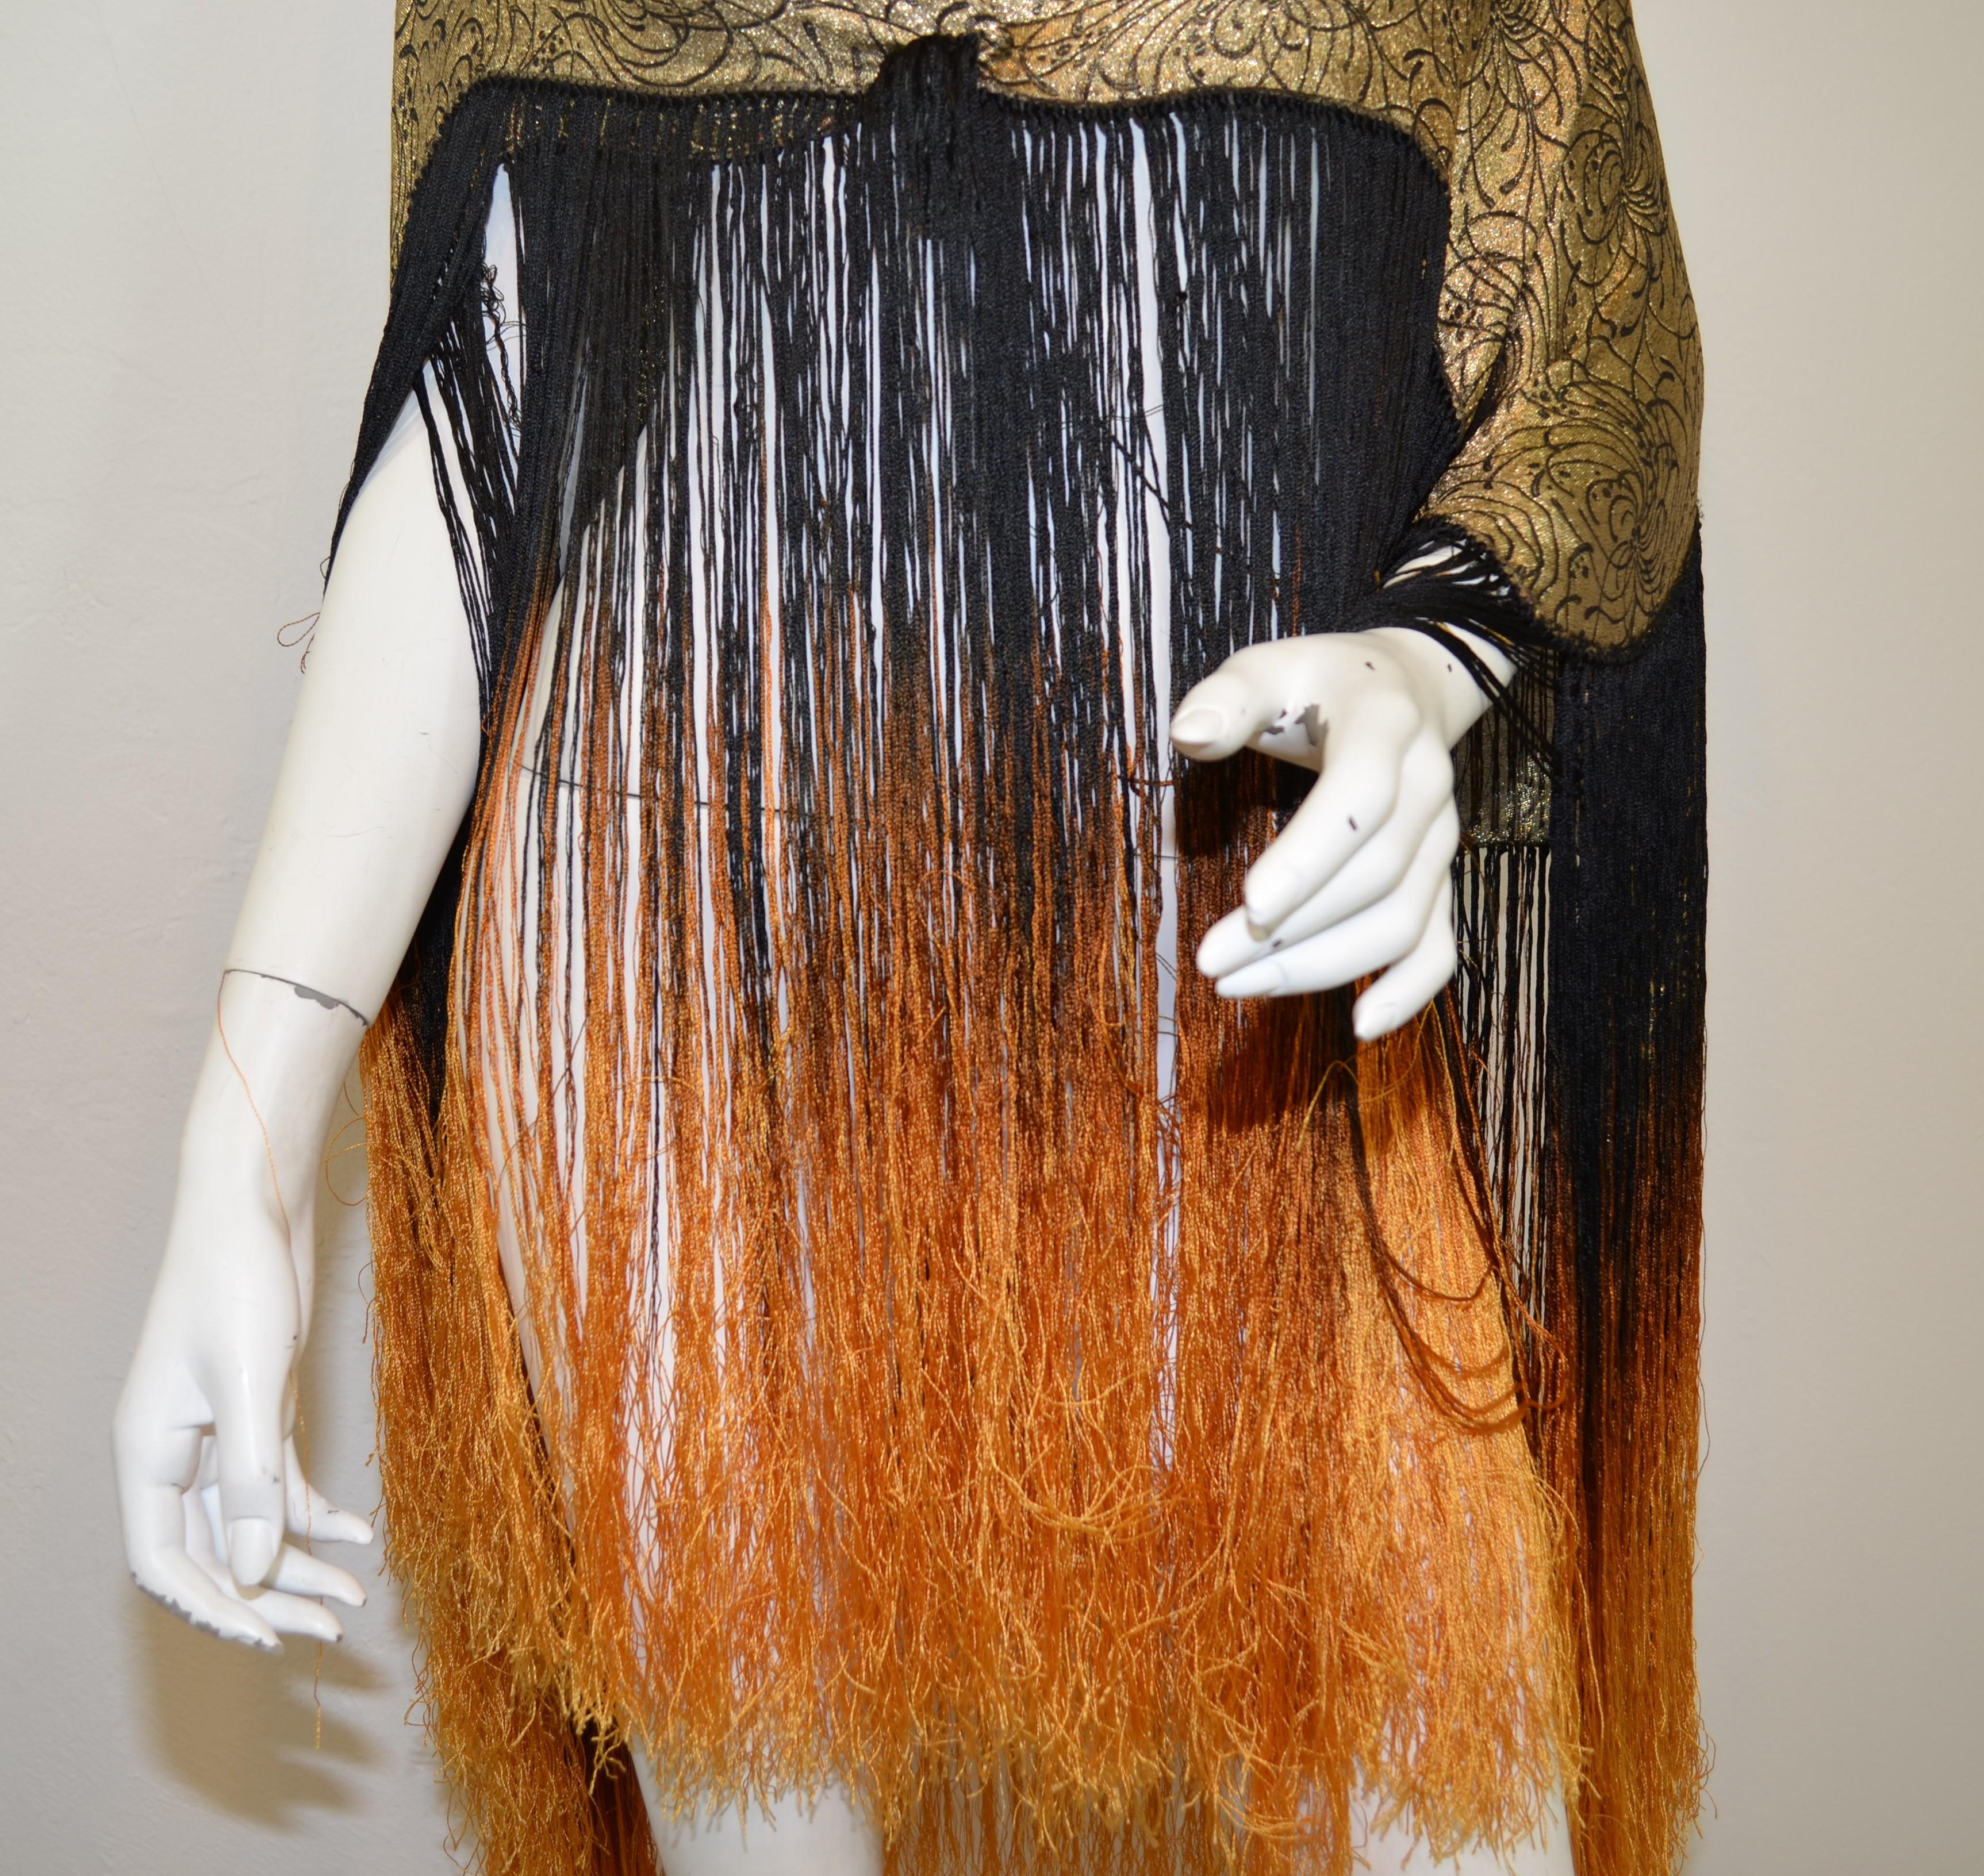 Beautiful 1920's gold and black lame shawl featuring long, ombre fringing. Shawl is in wonderful condition considering age, with some minor tarnishing as photographed. 

Measurements:
Length 45 x 34'' (not including fringe), fringed ends measure 20''